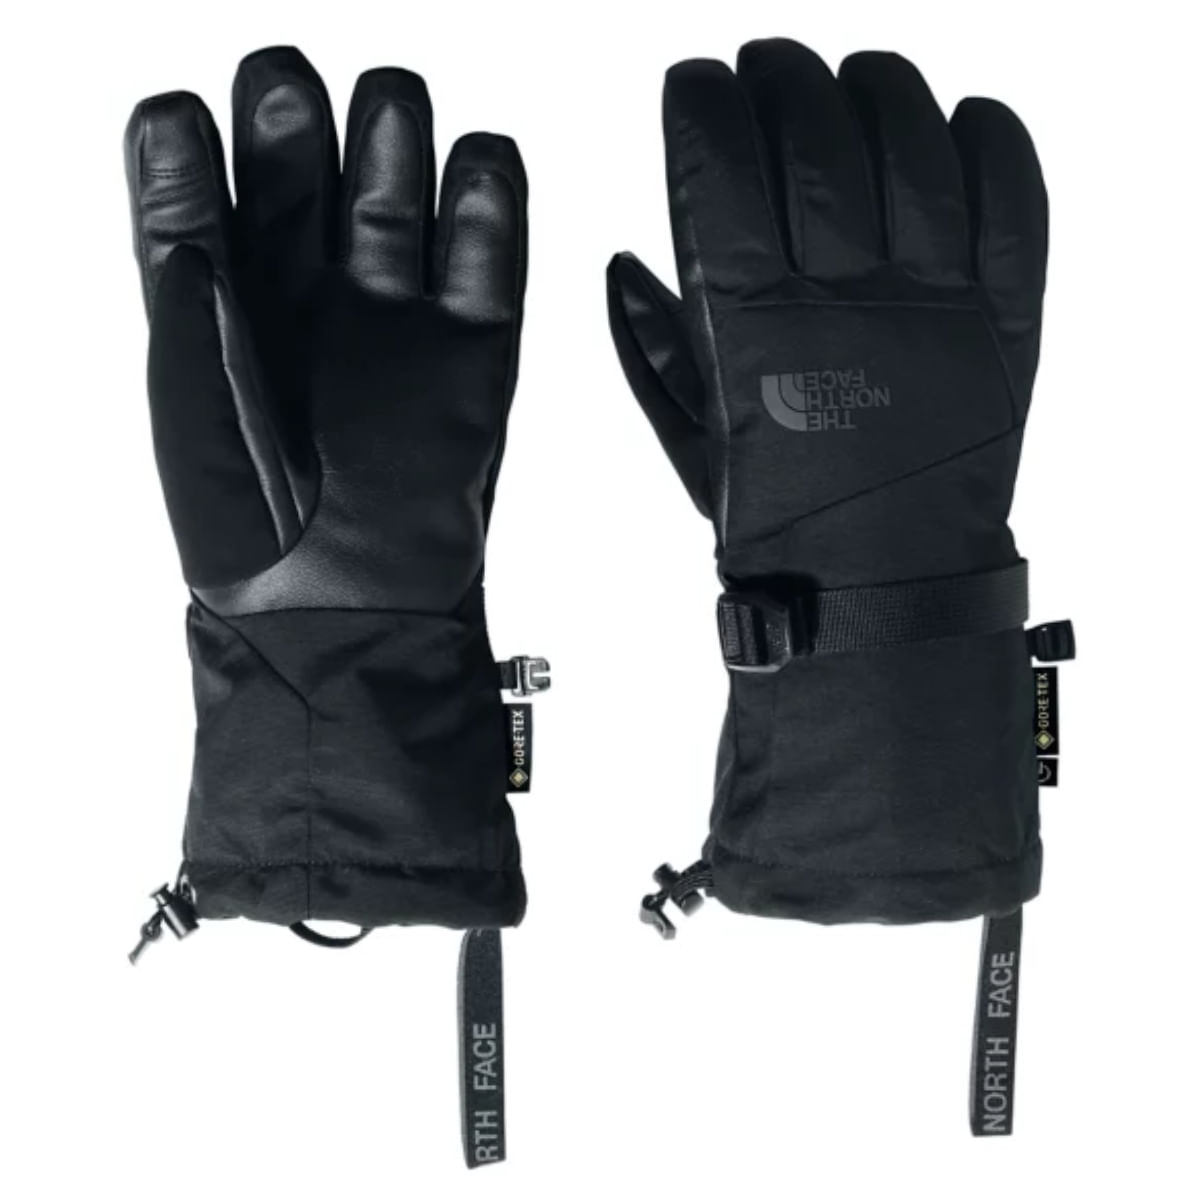 the north face montana etip gloves